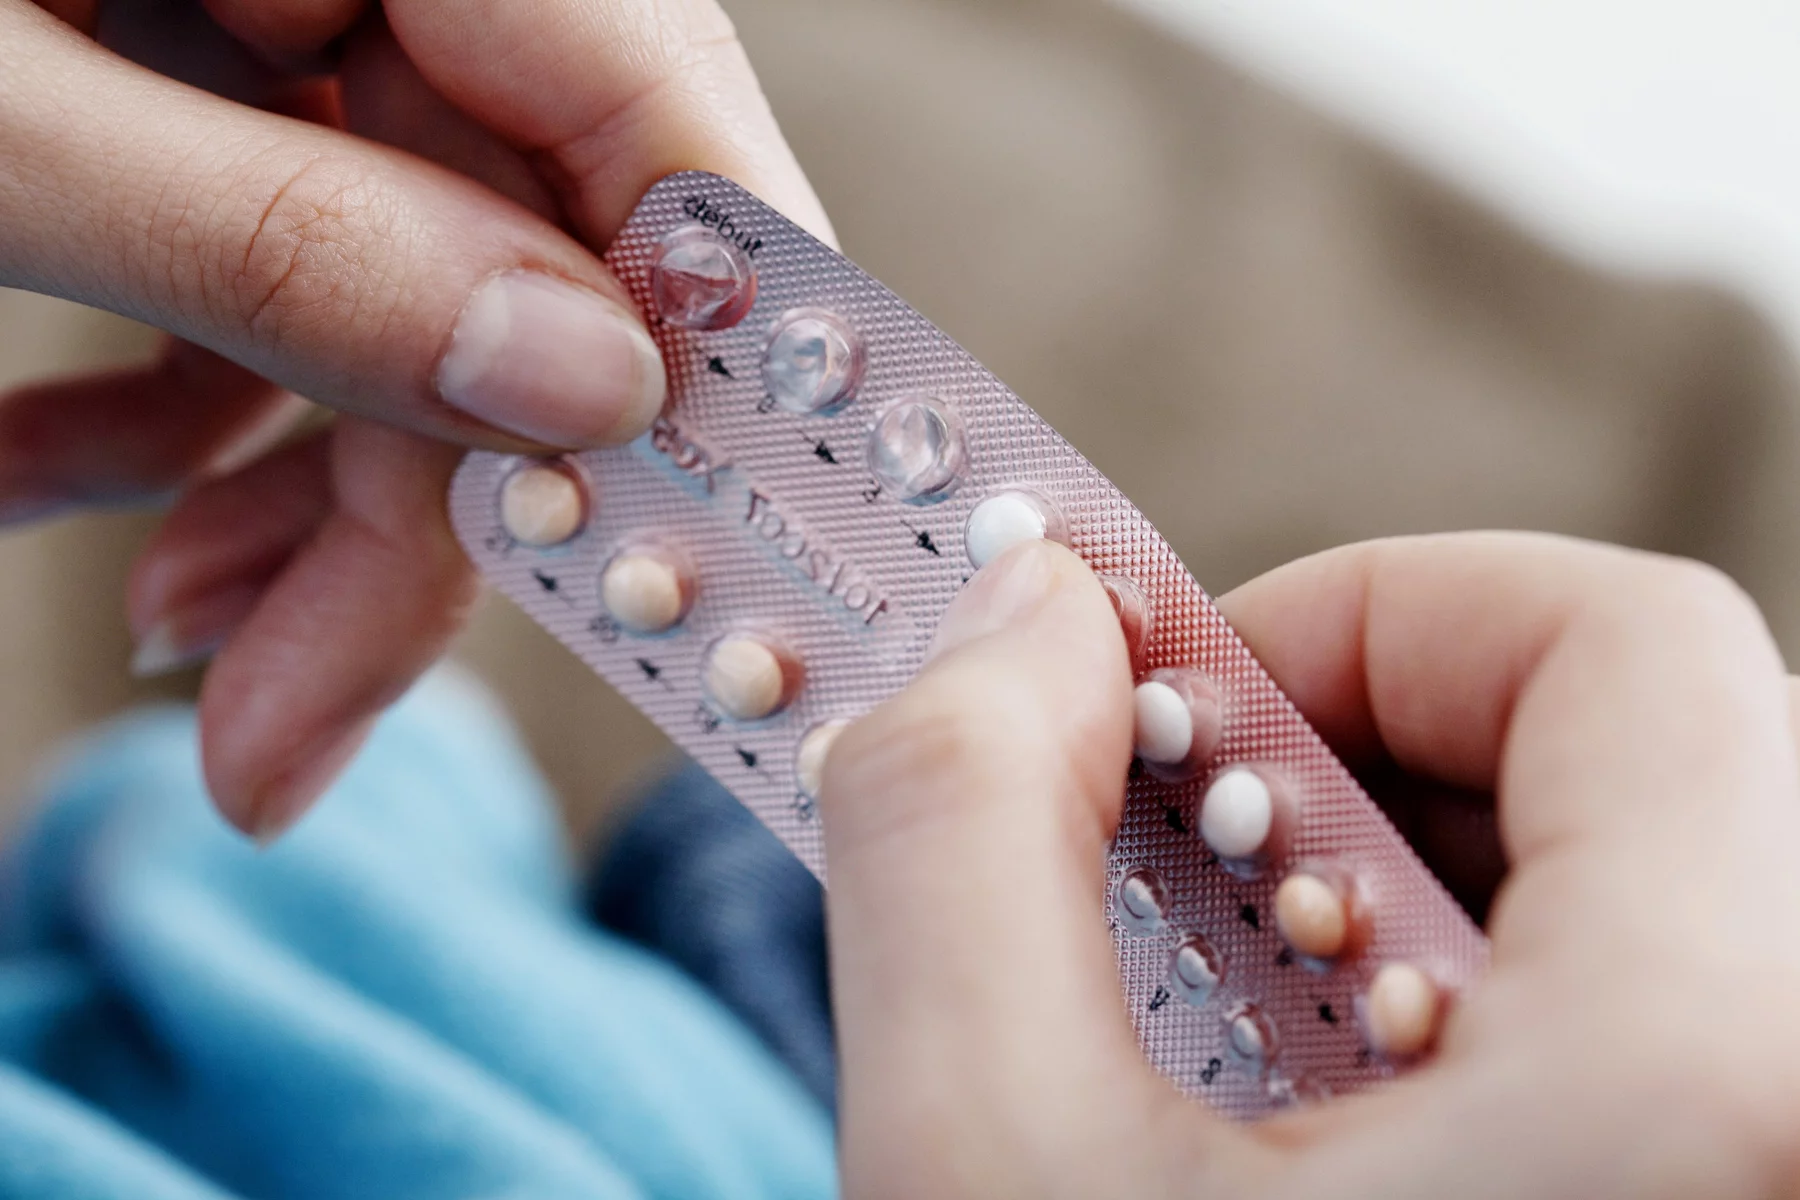 a woman holding a pack of contraceptive pills